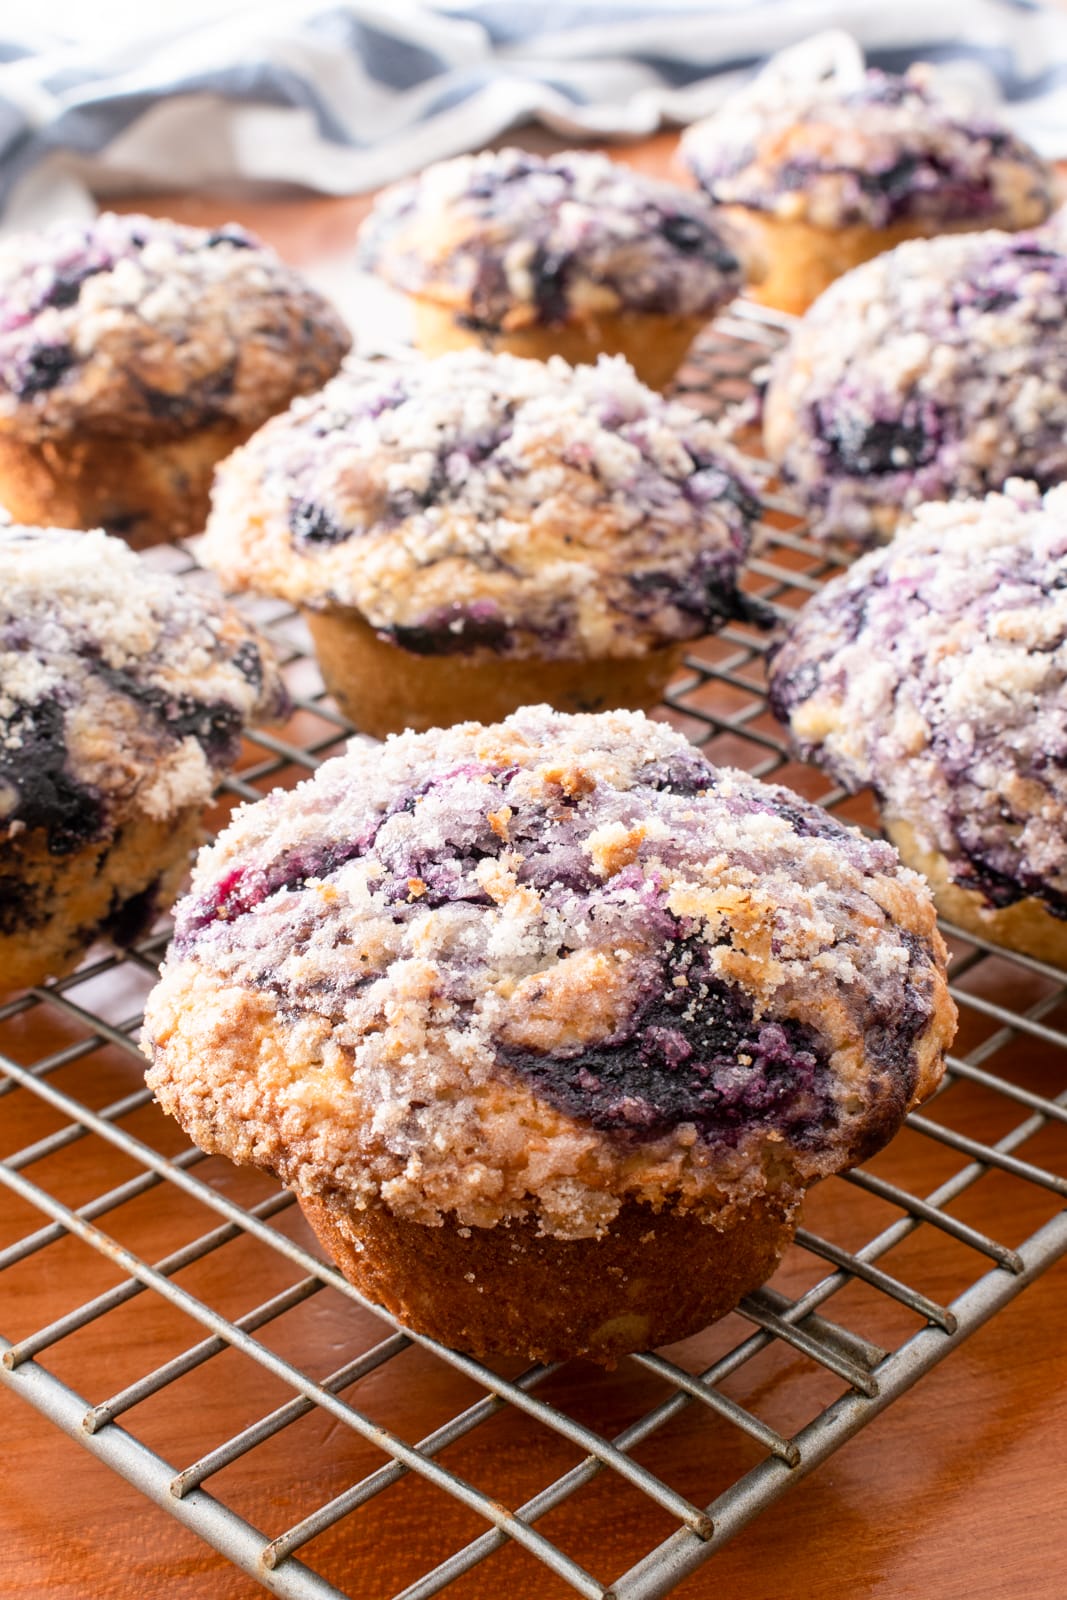 https://fortheloveofcooking-net.exactdn.com/wp-content/uploads/2020/06/Blueberry-Swirl-Muffins-5008-2.jpg?strip=all&lossy=1&quality=90&ssl=1